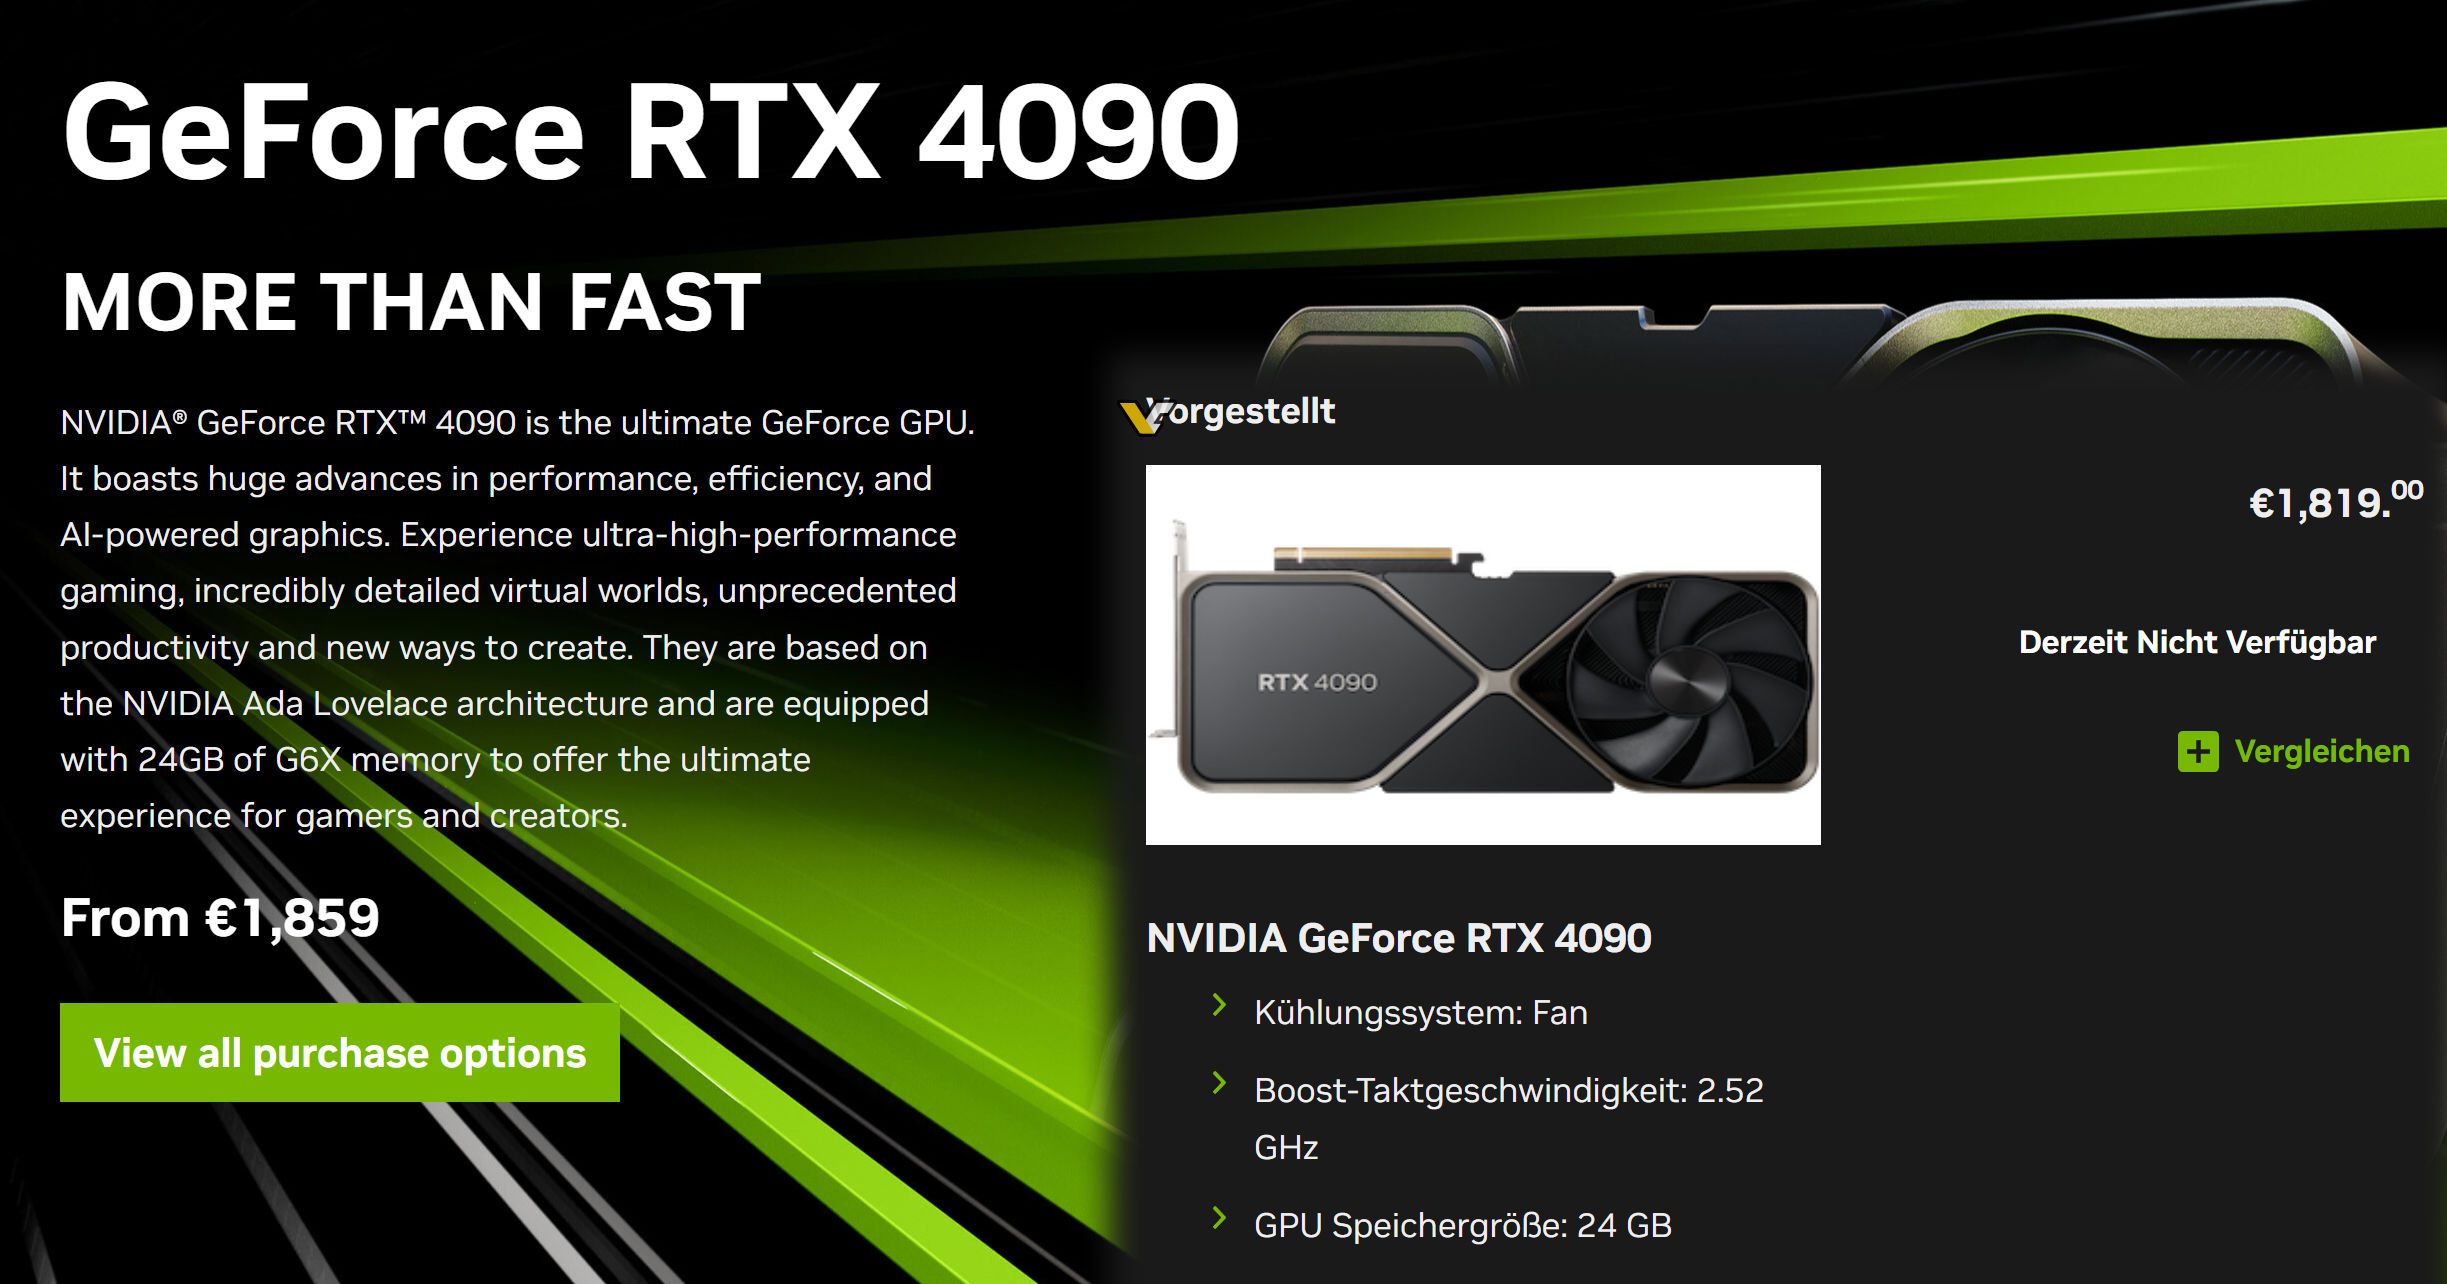 Nvidia Partners Finally Drop Prices on GeForce RTX 4090 and RTX 4080  Graphics Cards